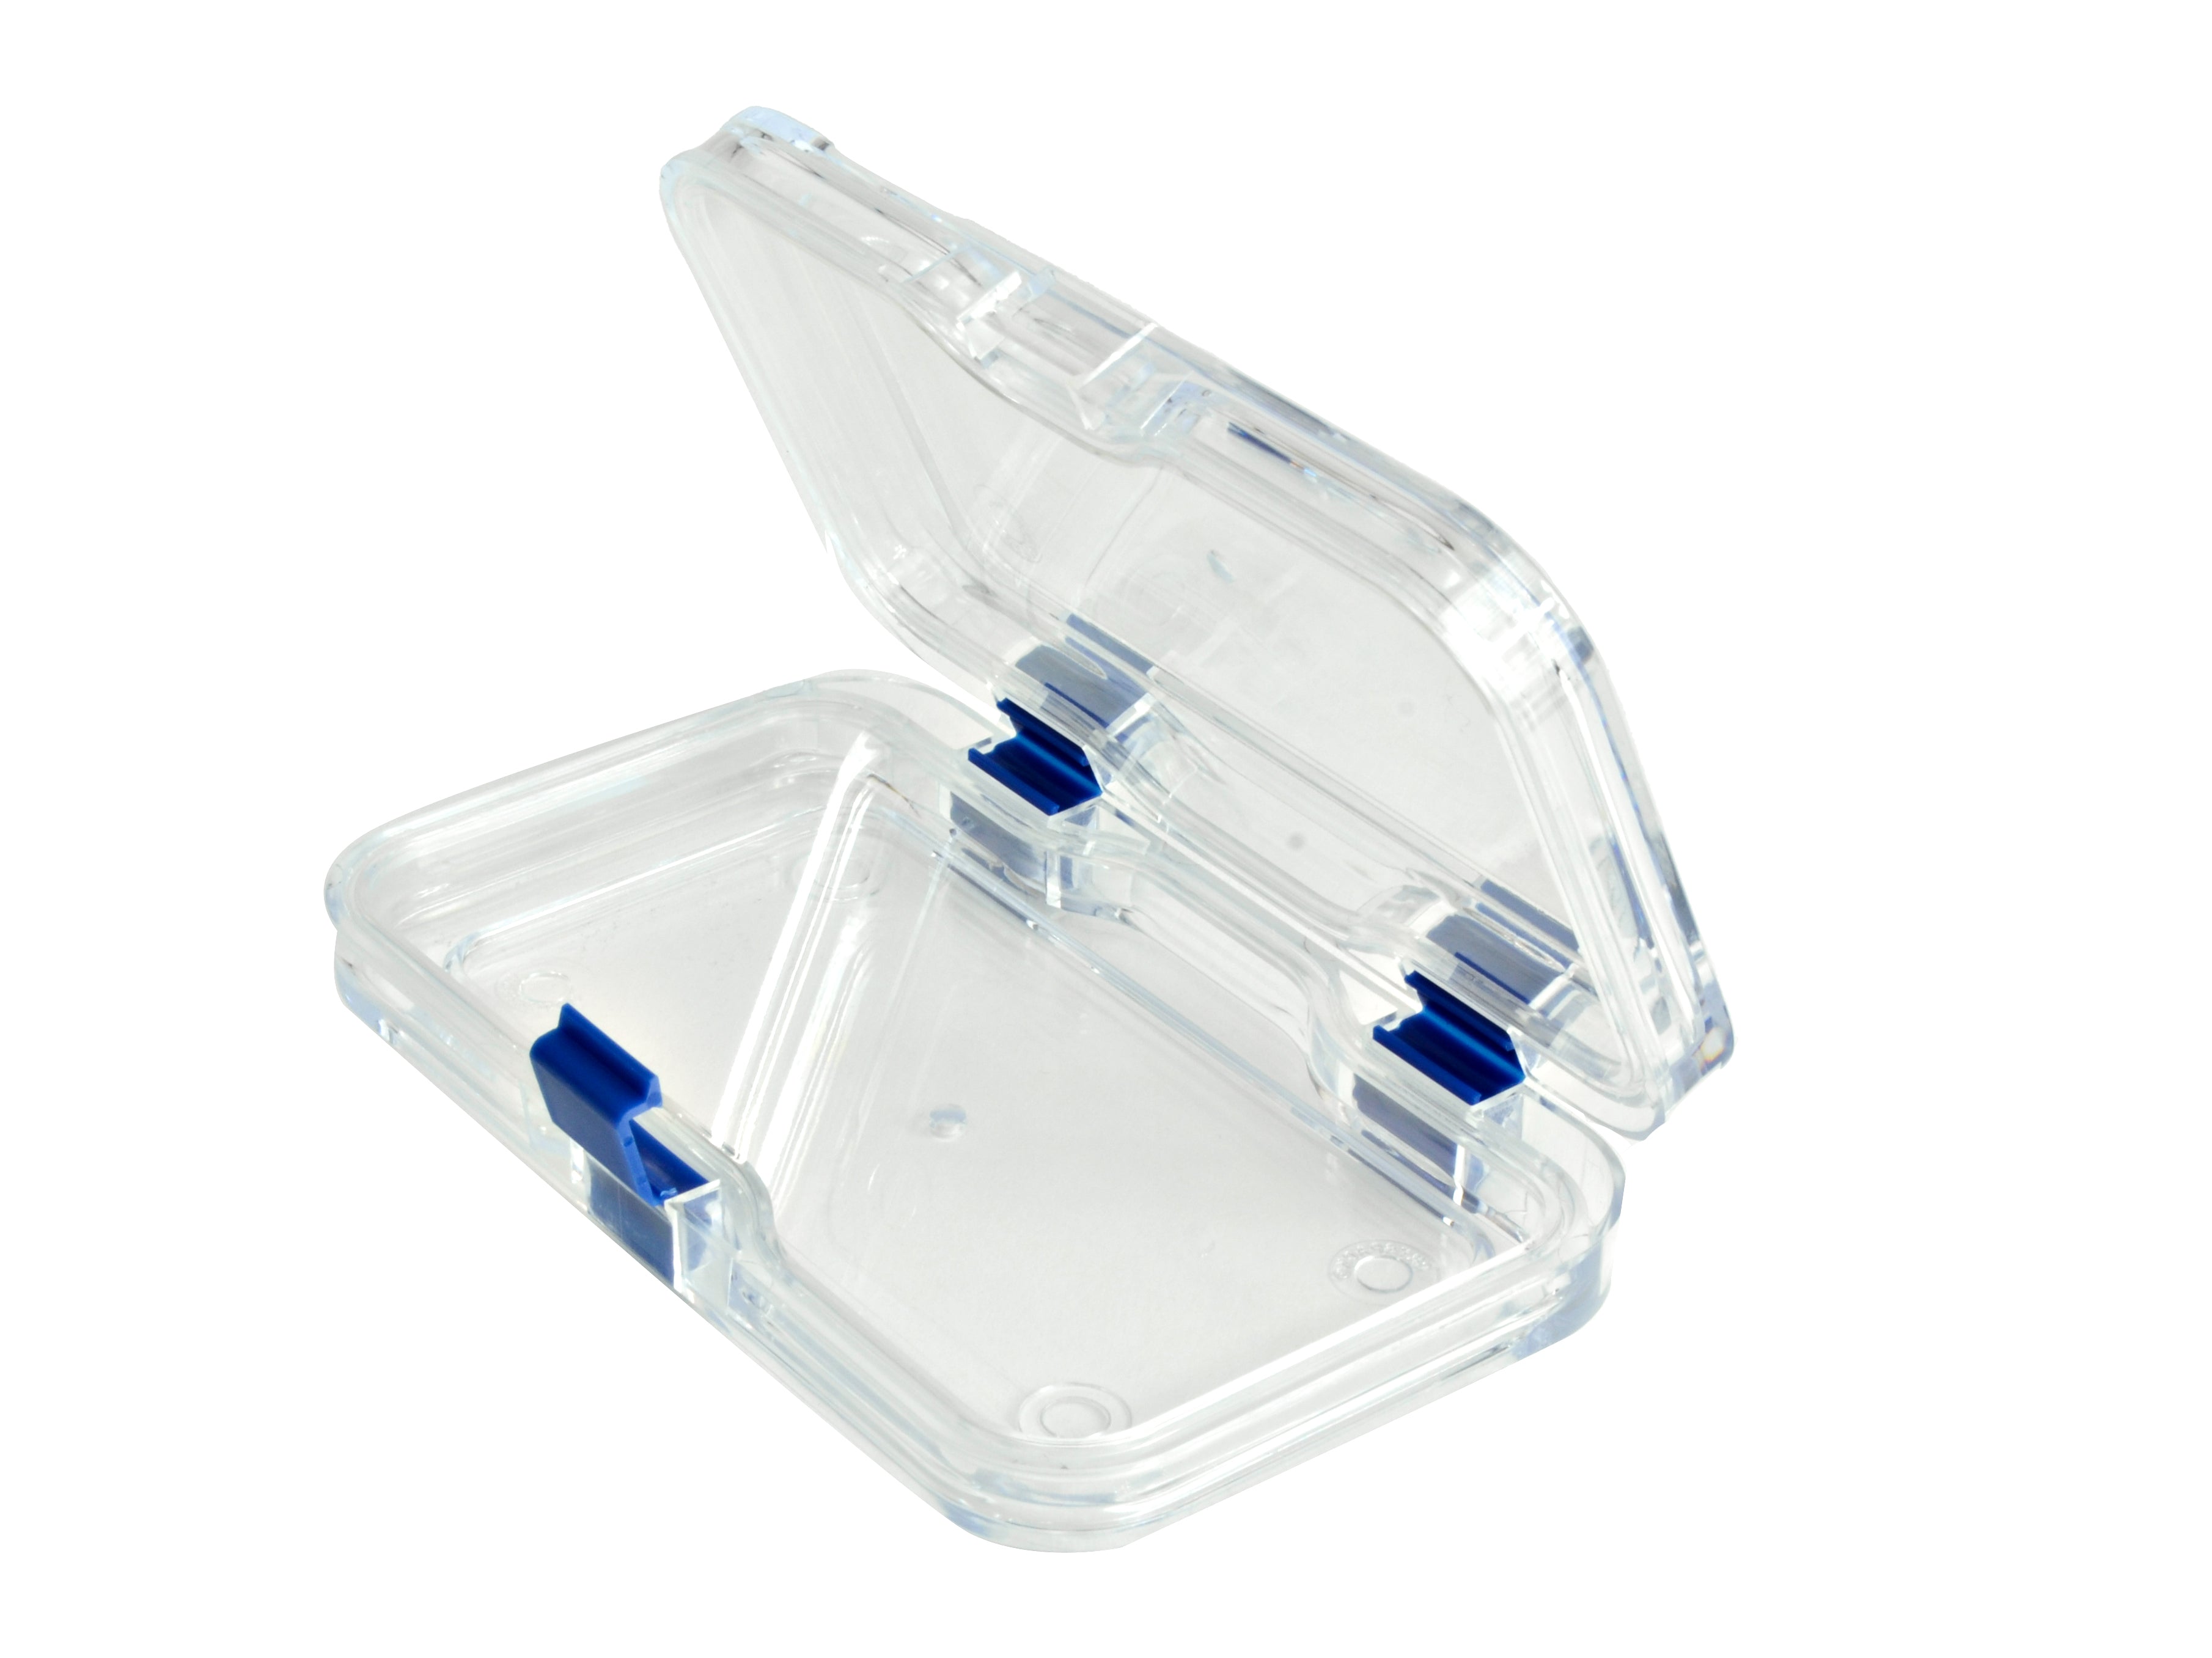 Pack of 12 MSE PRO Plastic Membrane Boxes (38x38x17 mm) for